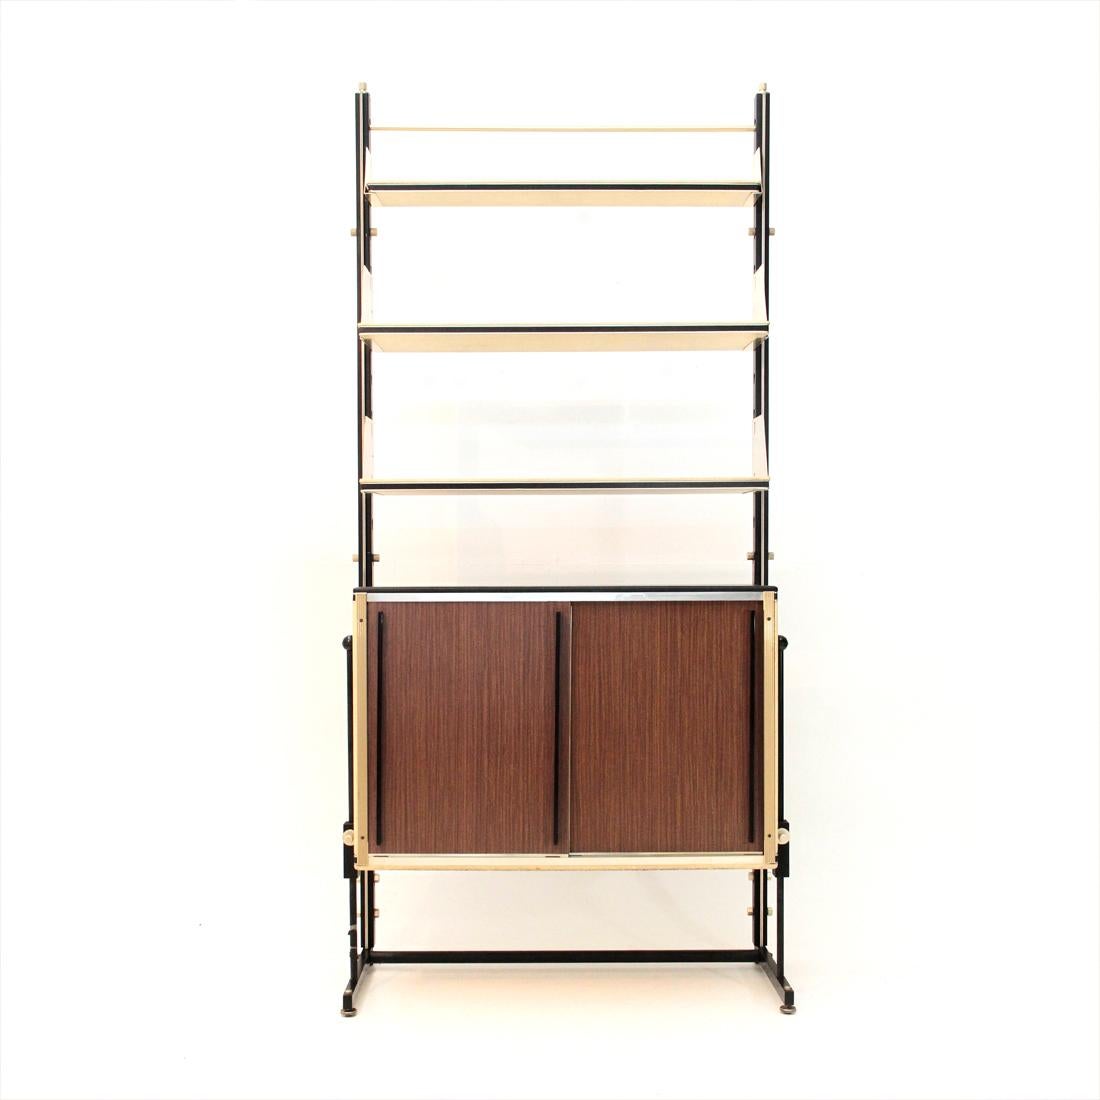 Italian manufacture bookshop produced in the 1960s.
Uprights in black painted metal with brass-plated metal details.
Wooden shelves covered in faux leather and brass-plated metal brackets.
Container with faux white leather sides, upper top in